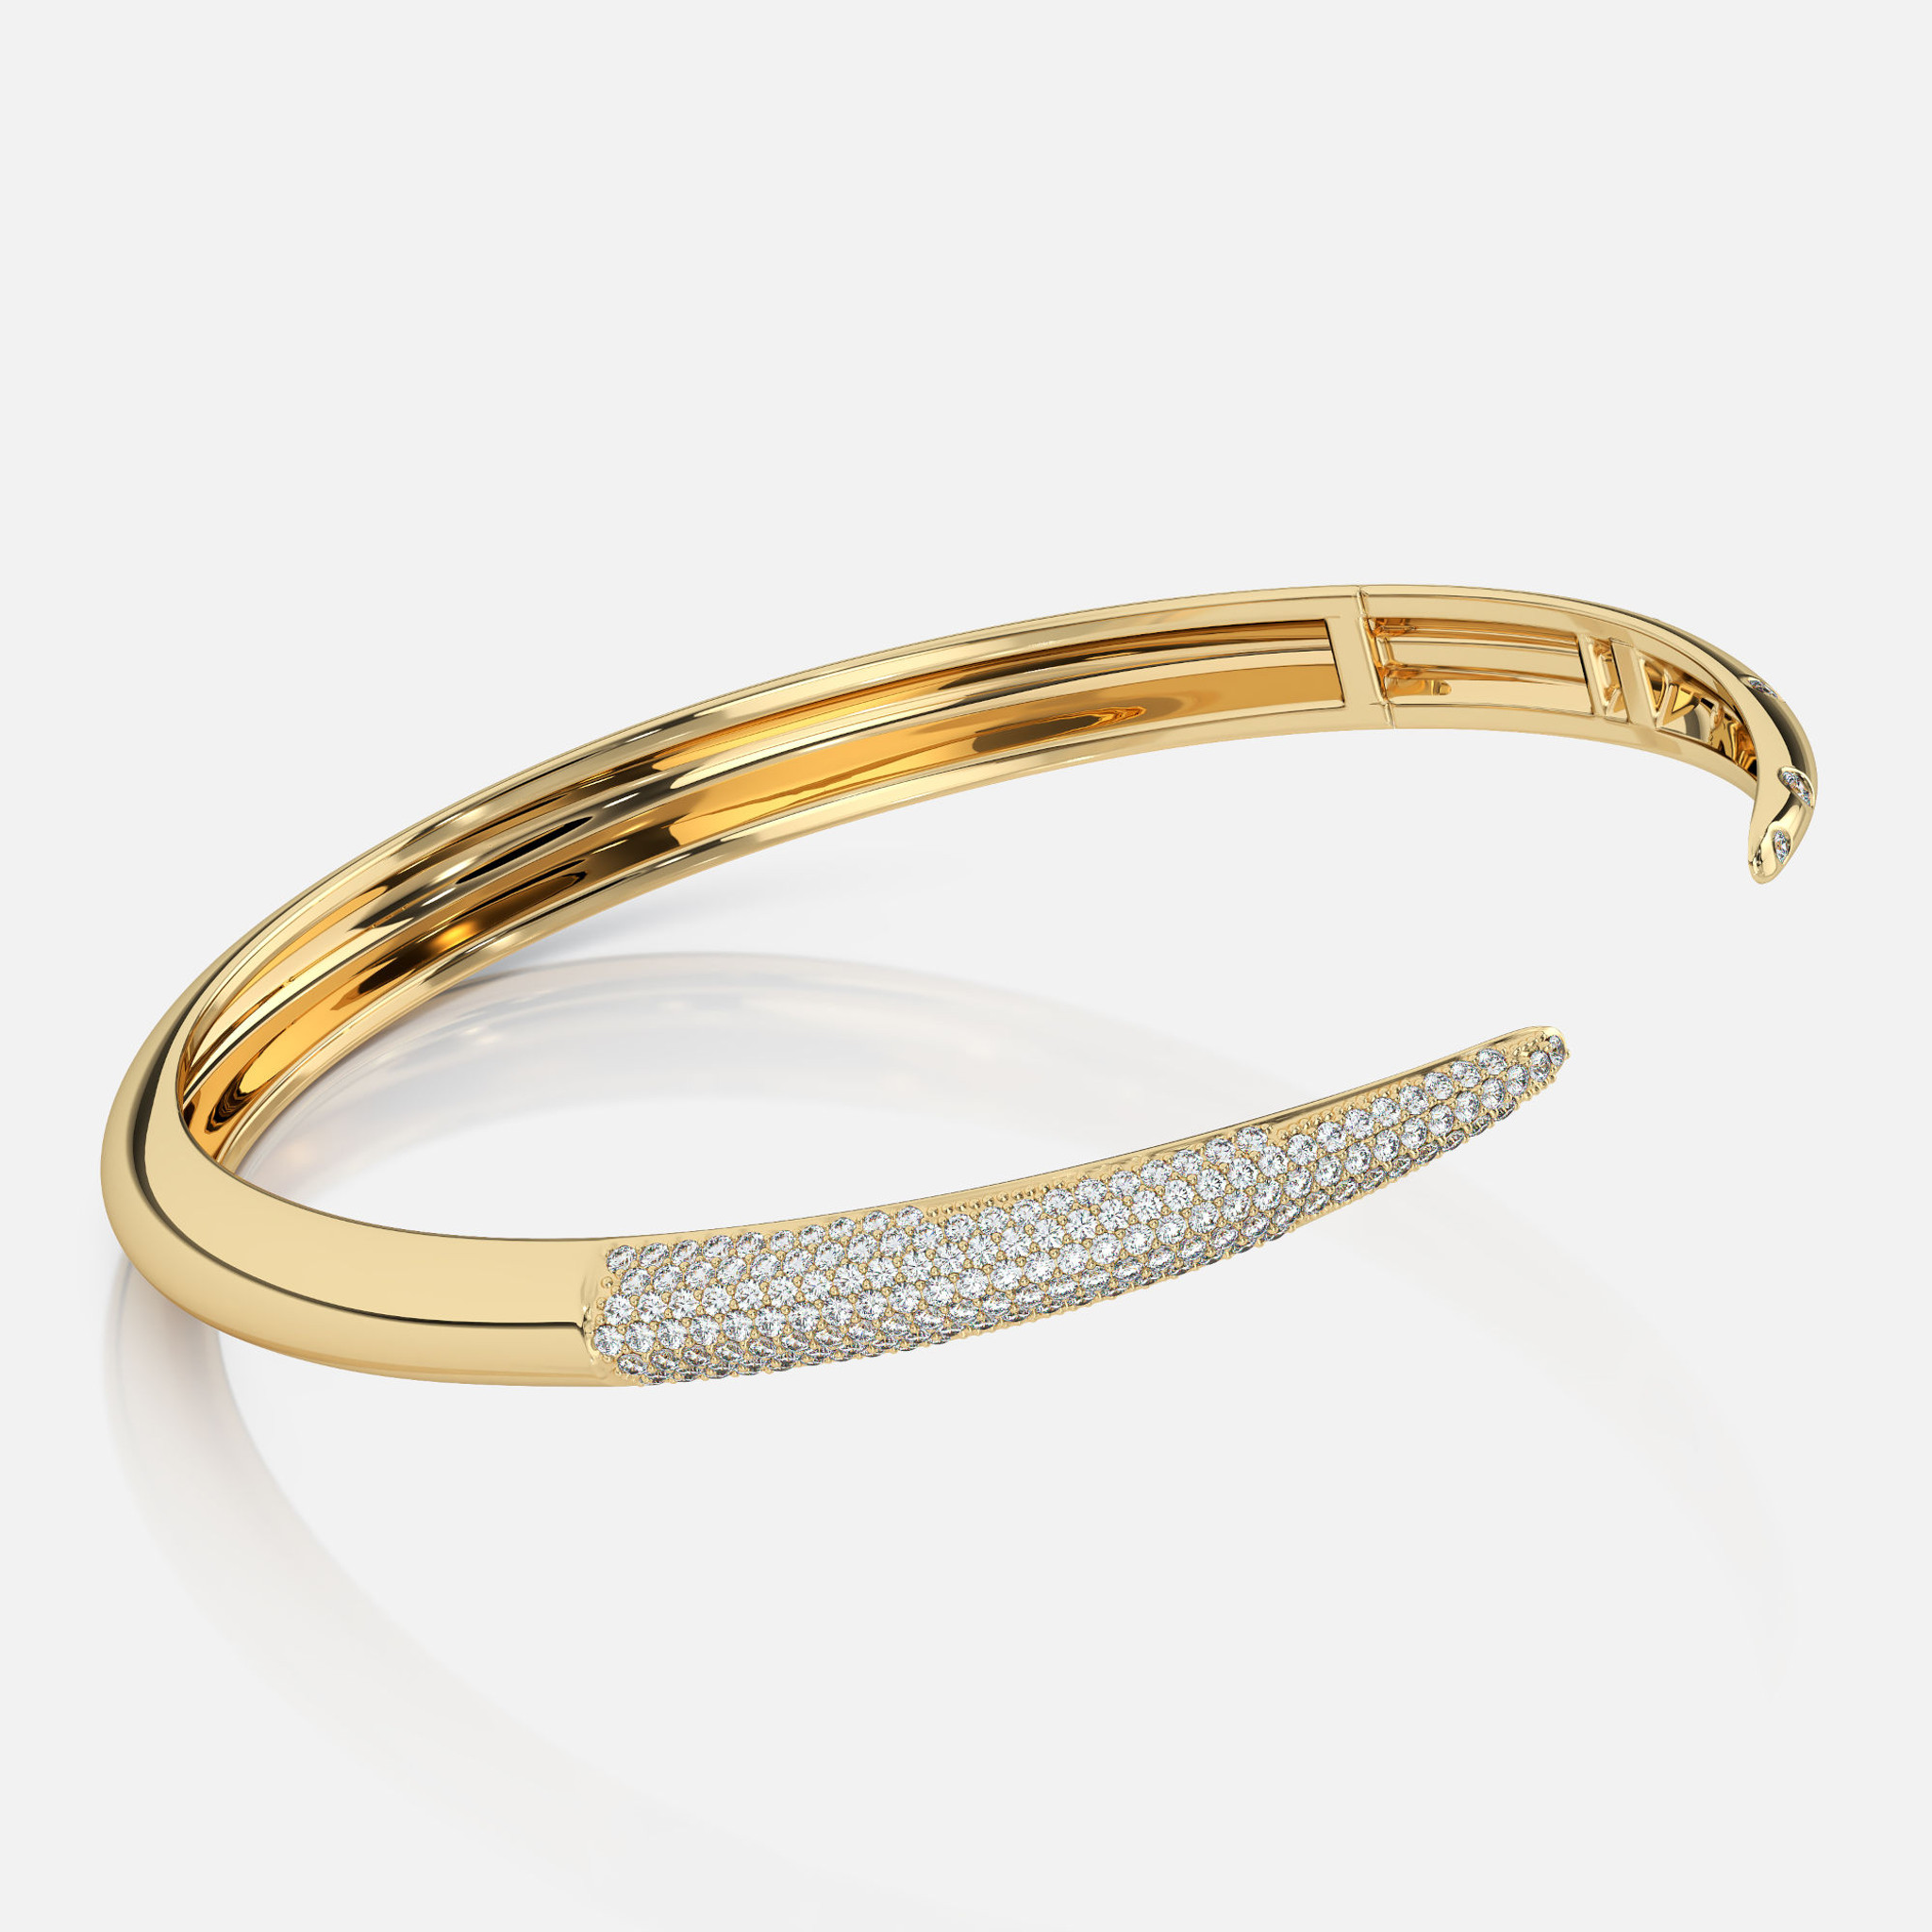 Effortless elegance: a 14k gold diamond cuff bracelet, the epitome of chic sophistication with .49ct of micro and brilliant-cut diamonds.